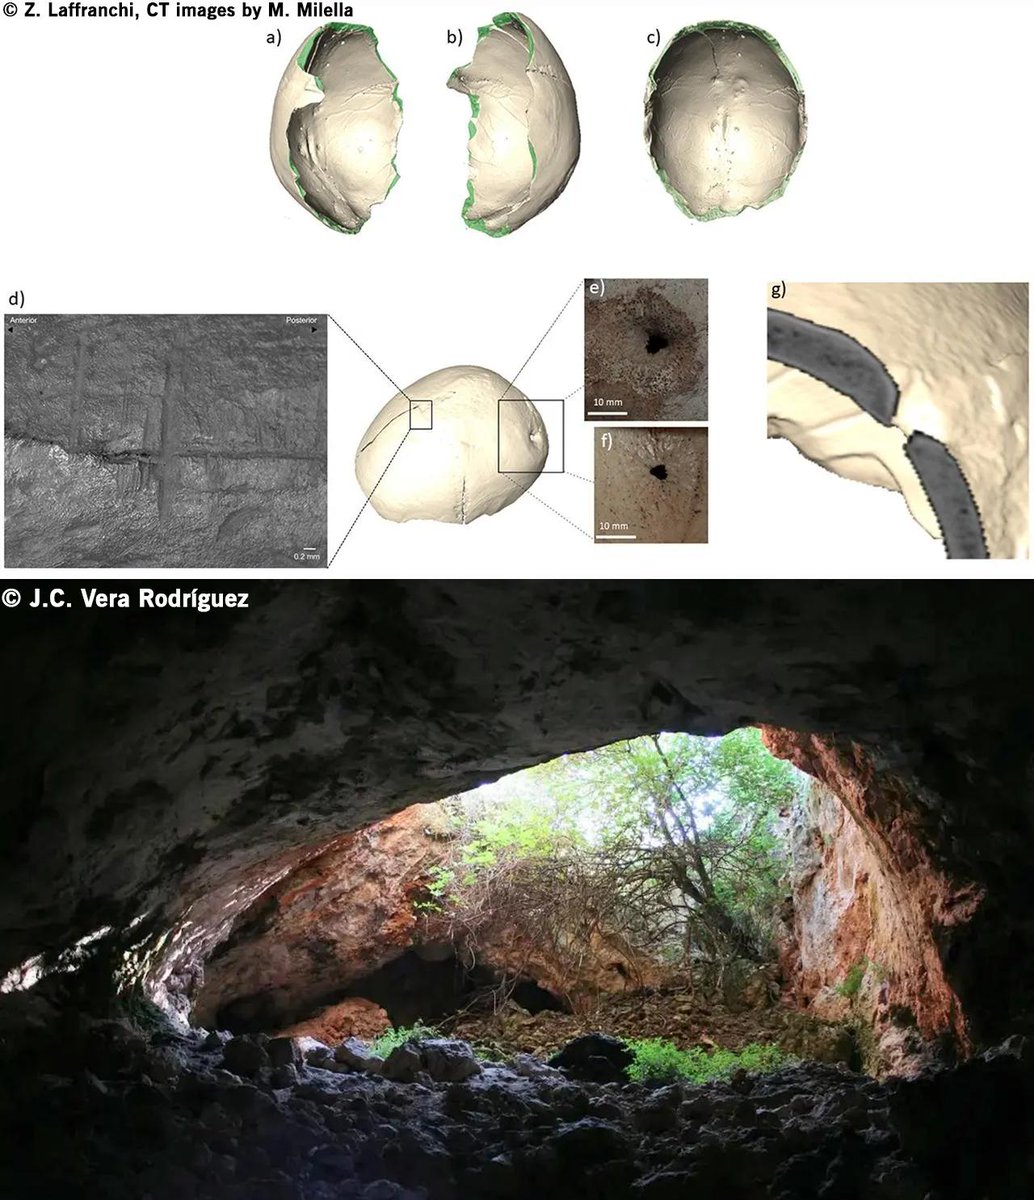 Cup made from prehistoric human skull discovered in Spanish cave

More information: archaeologymag.com/2023/09/cup-ma…
.
.
#archaeology #iberianpeninsula #anthropology